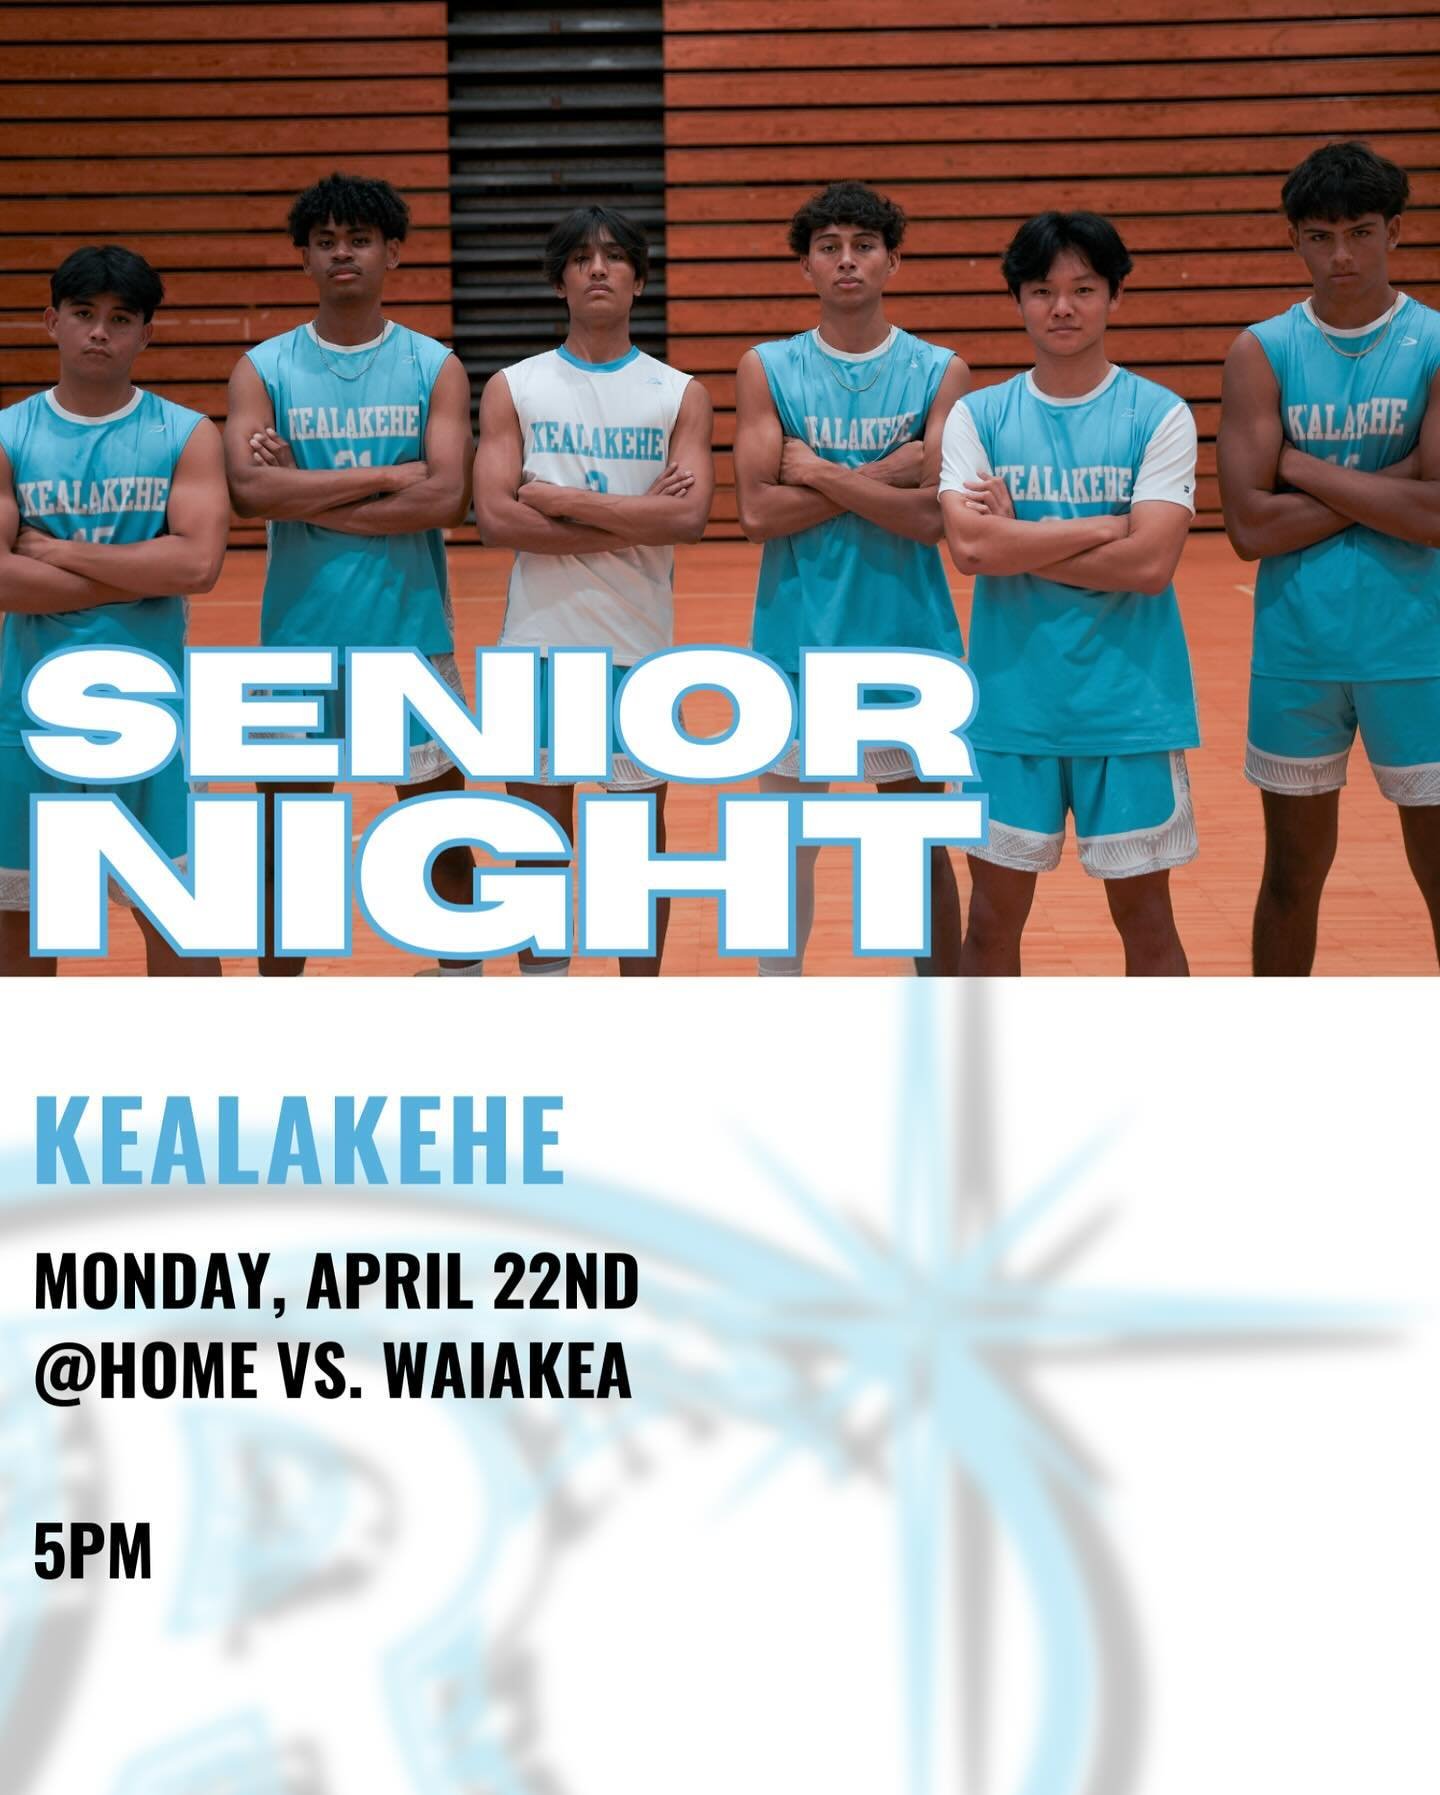 Please come support our Kealakehe seniors on Monday for their last home game! 

Also shout out to Fatu, our other great senior who suffered an injury at the beginning of the season and has not been able to play with the team.